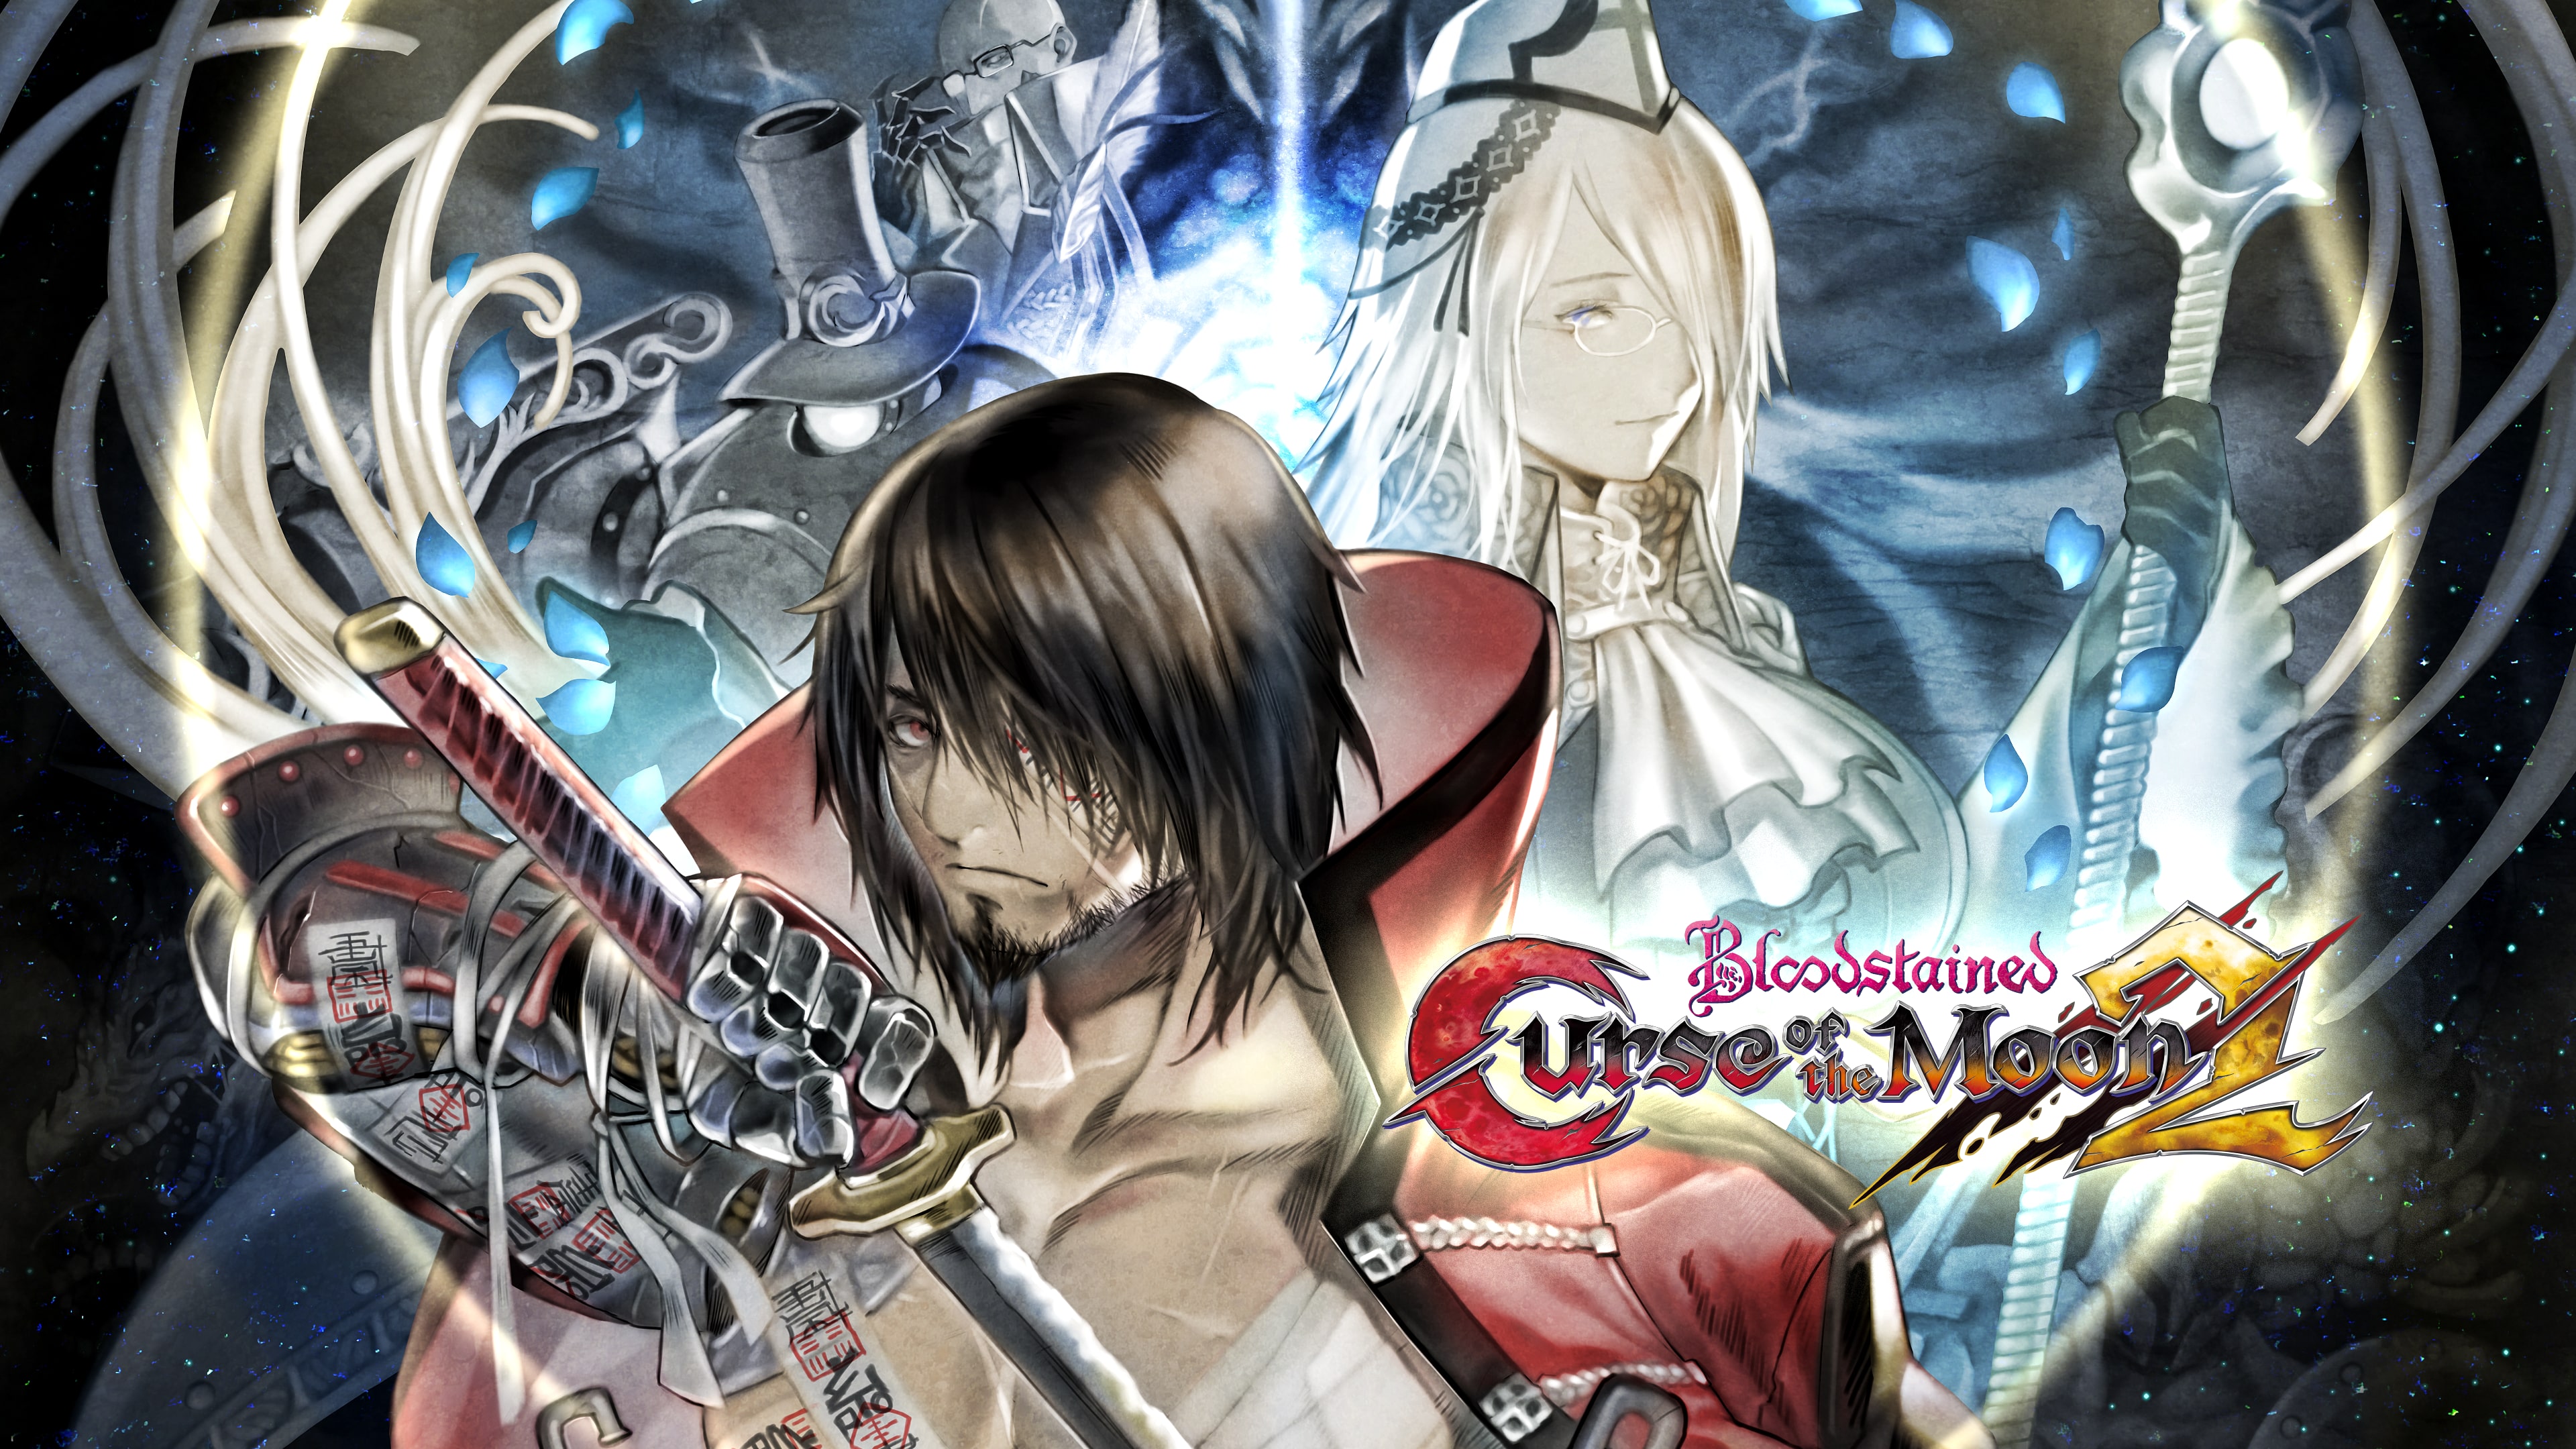 Bloodstained: Curse of the Moon 2 (日语, 英语)